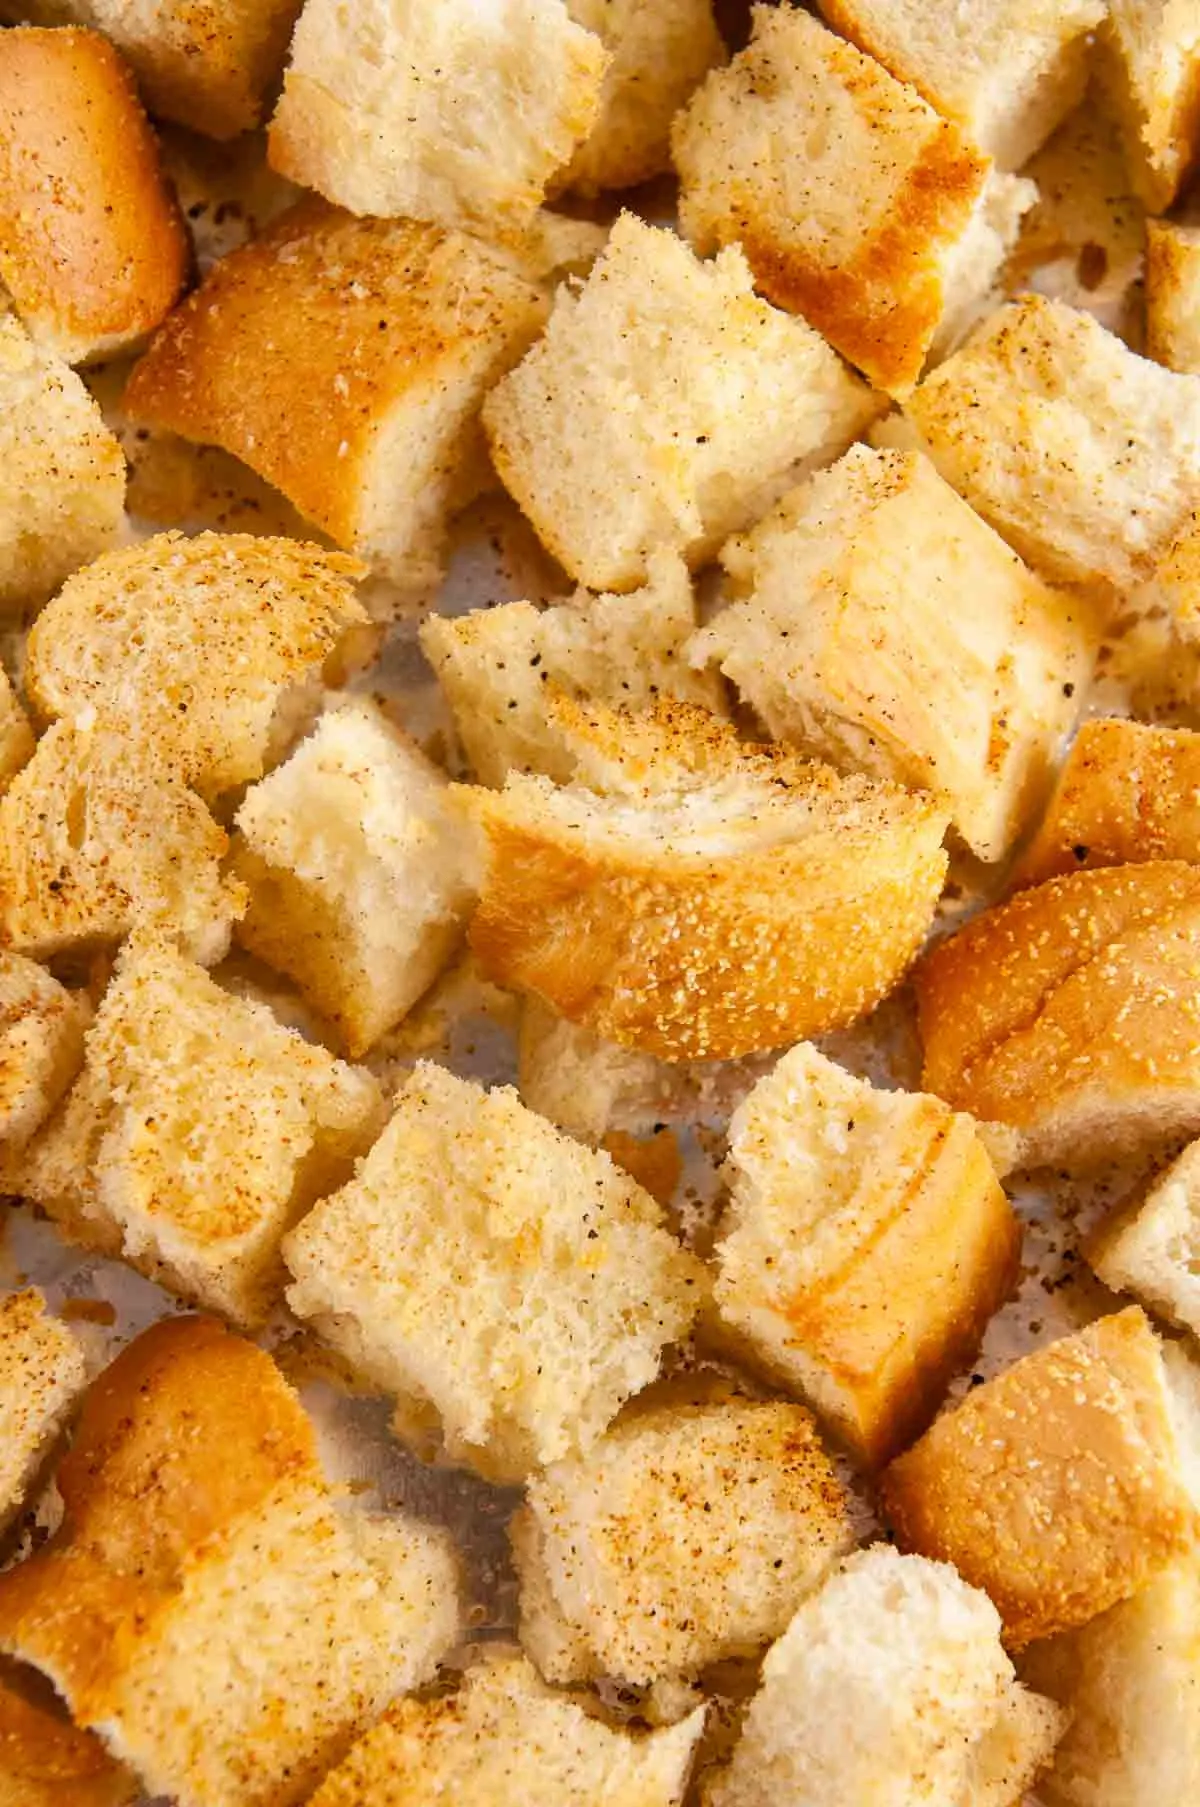 Toss the bread cubes with olive oil and toast it in the oven.